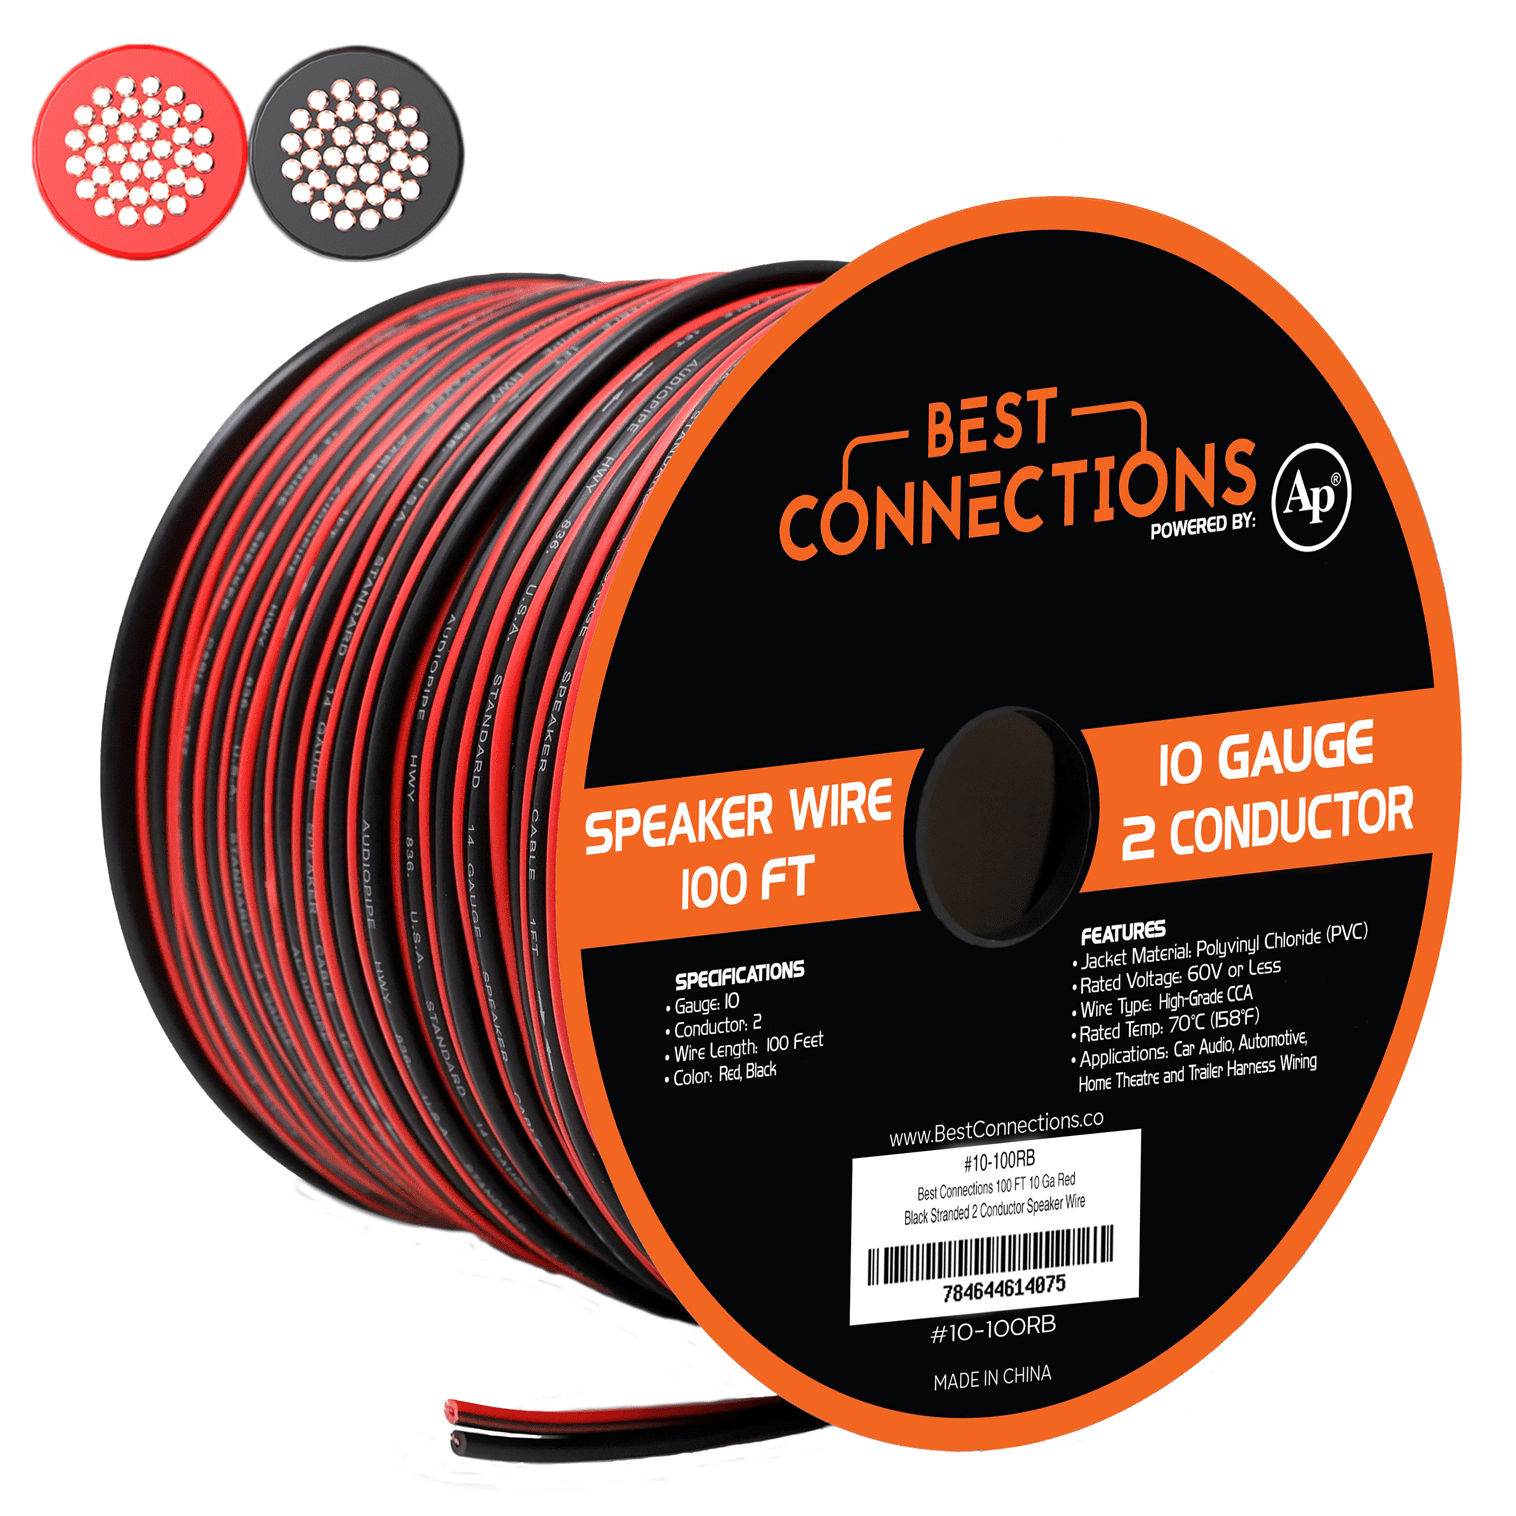 Stranded Wire: Black, 30 AWG, 100 Feet